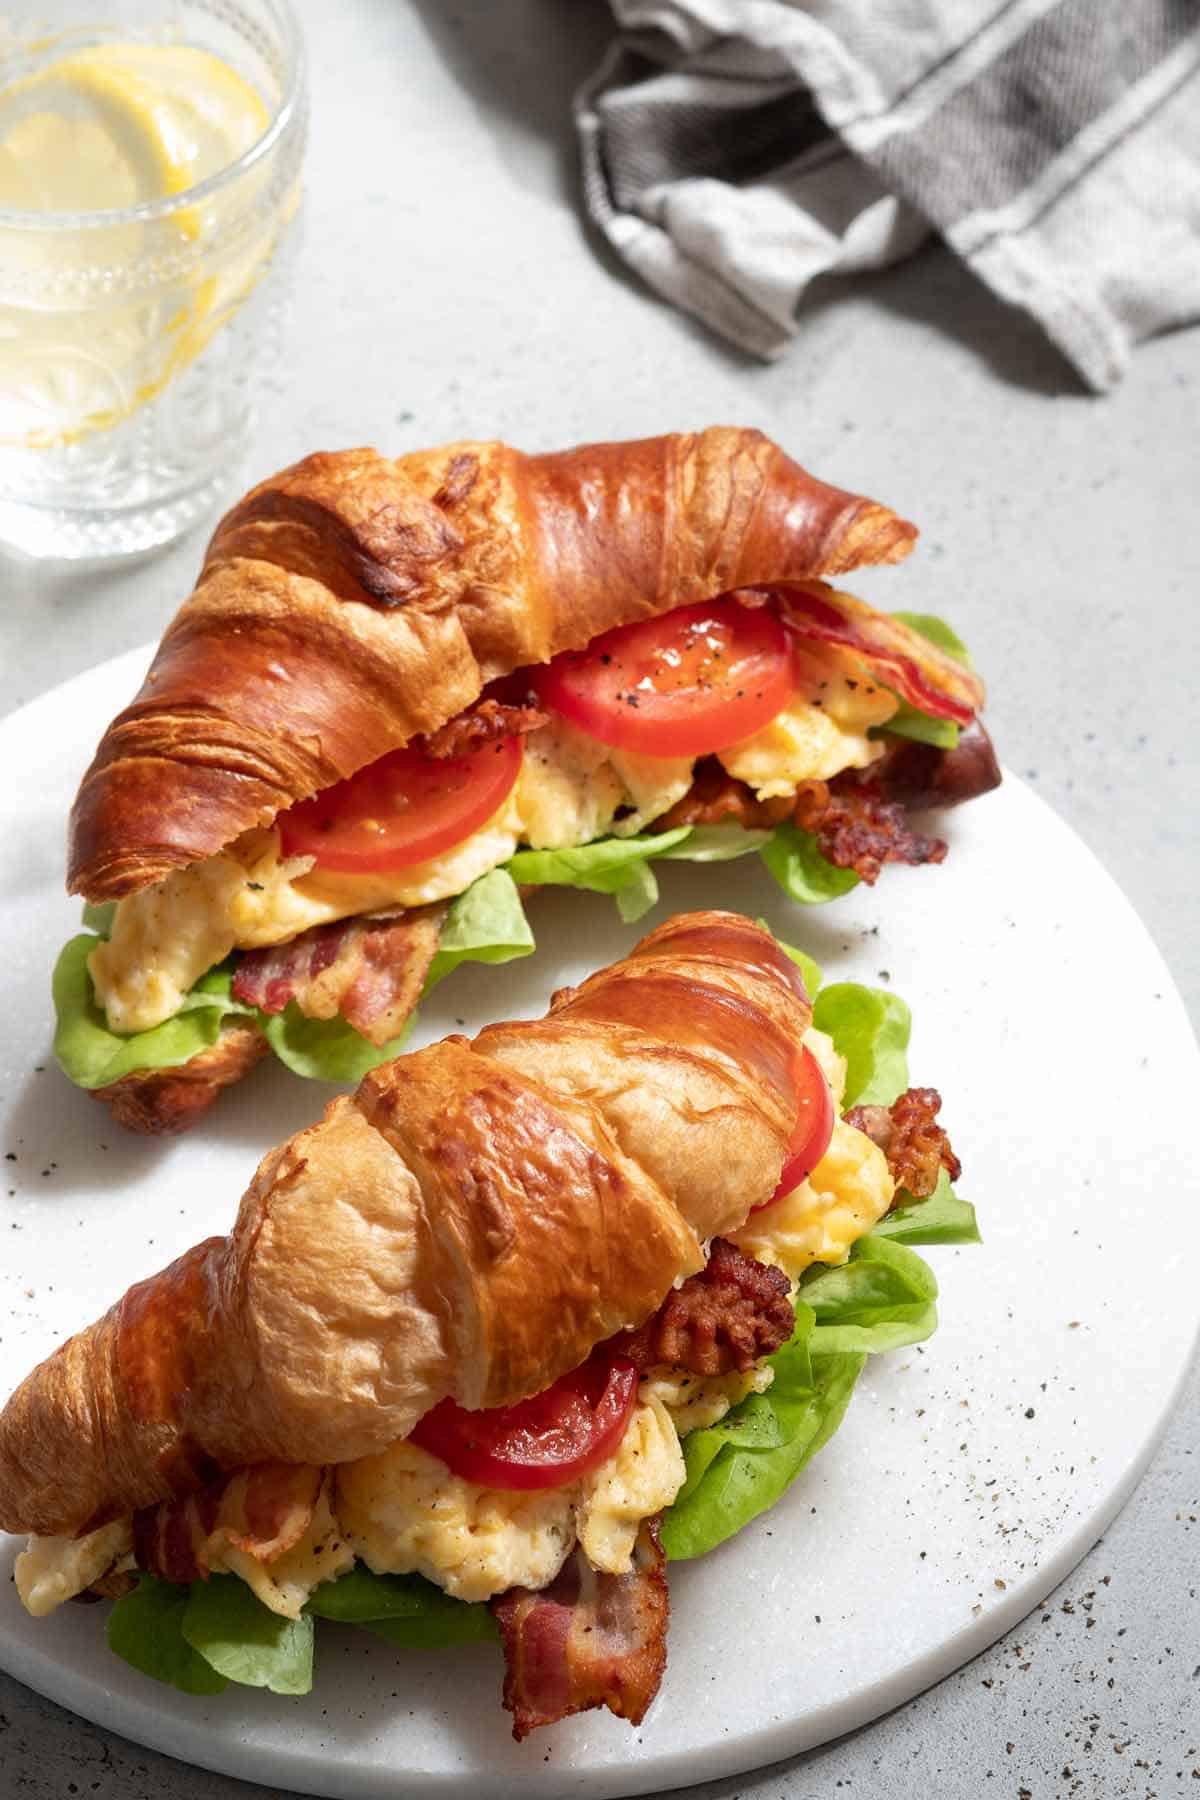 Egg, tomato, and bacon croissant sandwich on a serving tray.